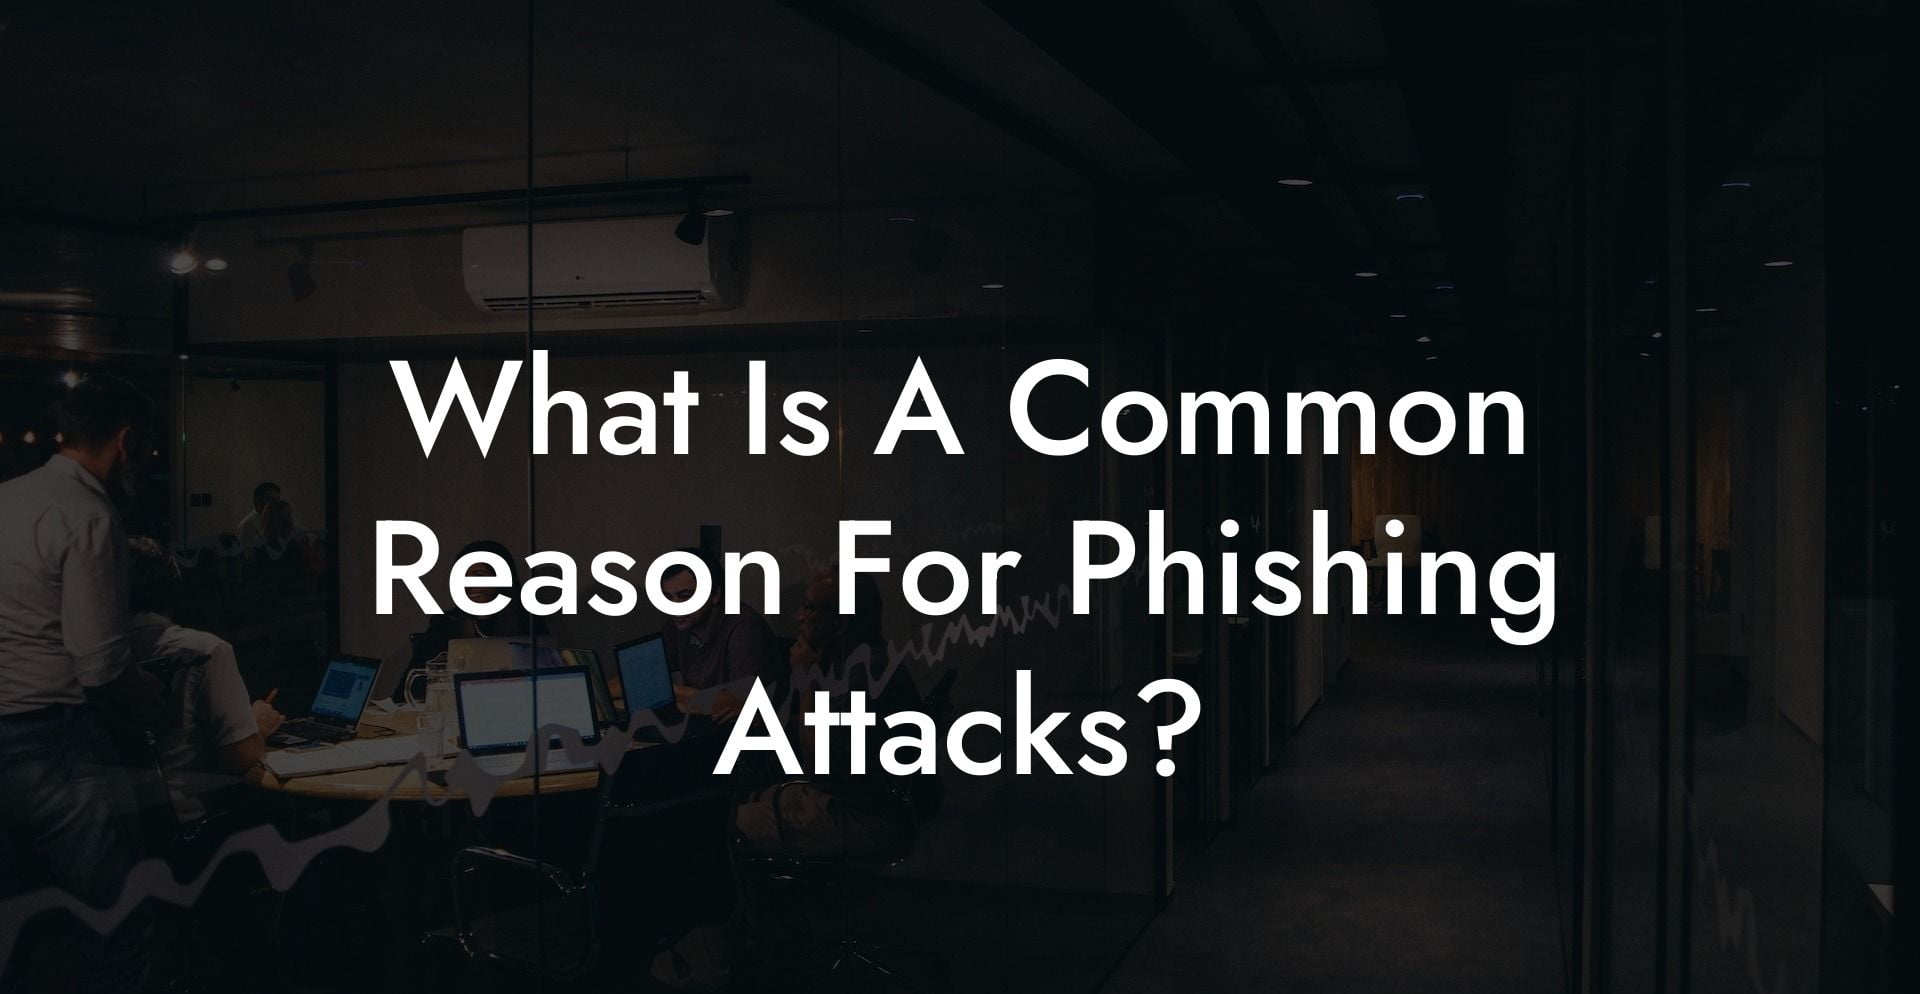 What Is A Common Reason For Phishing Attacks?